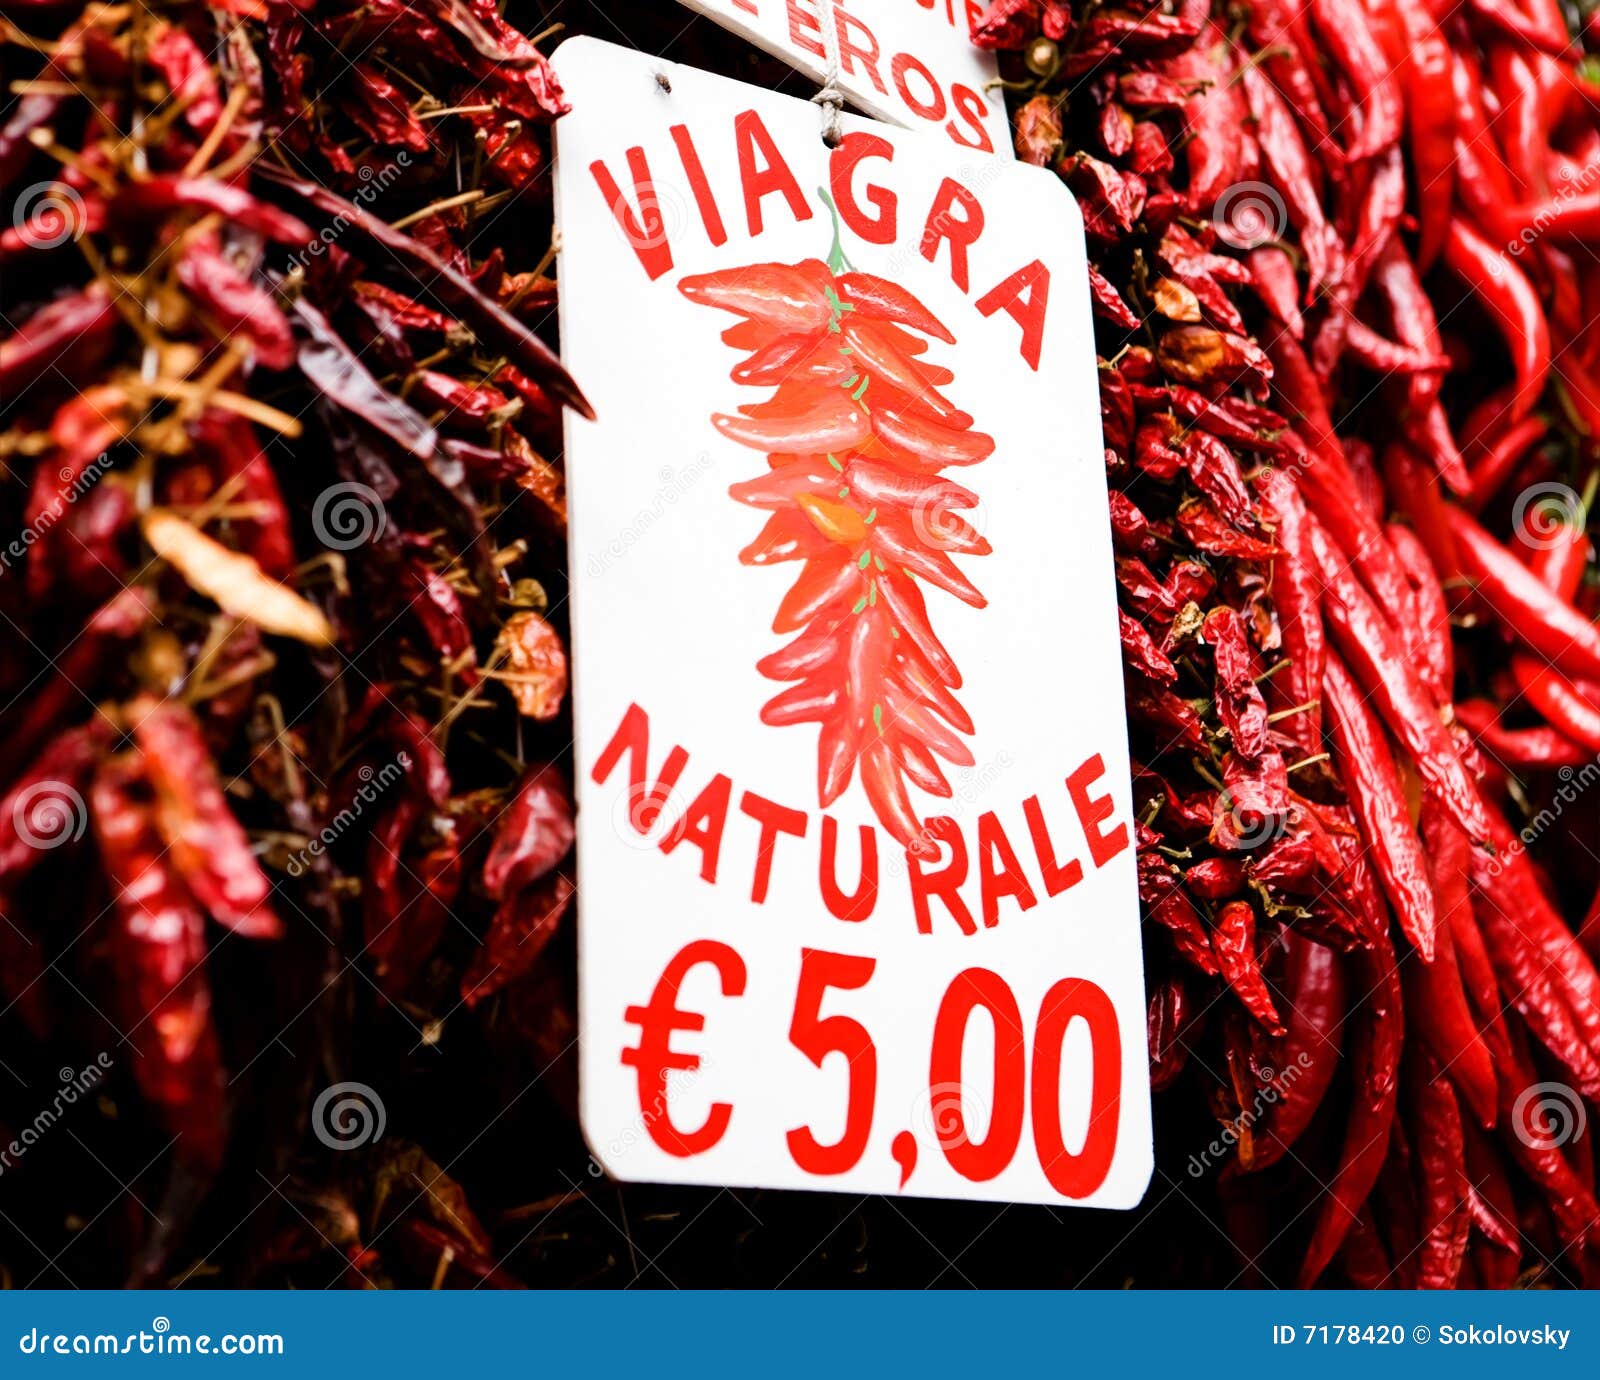 viagra naturale, bunch of red hot chilli pepper